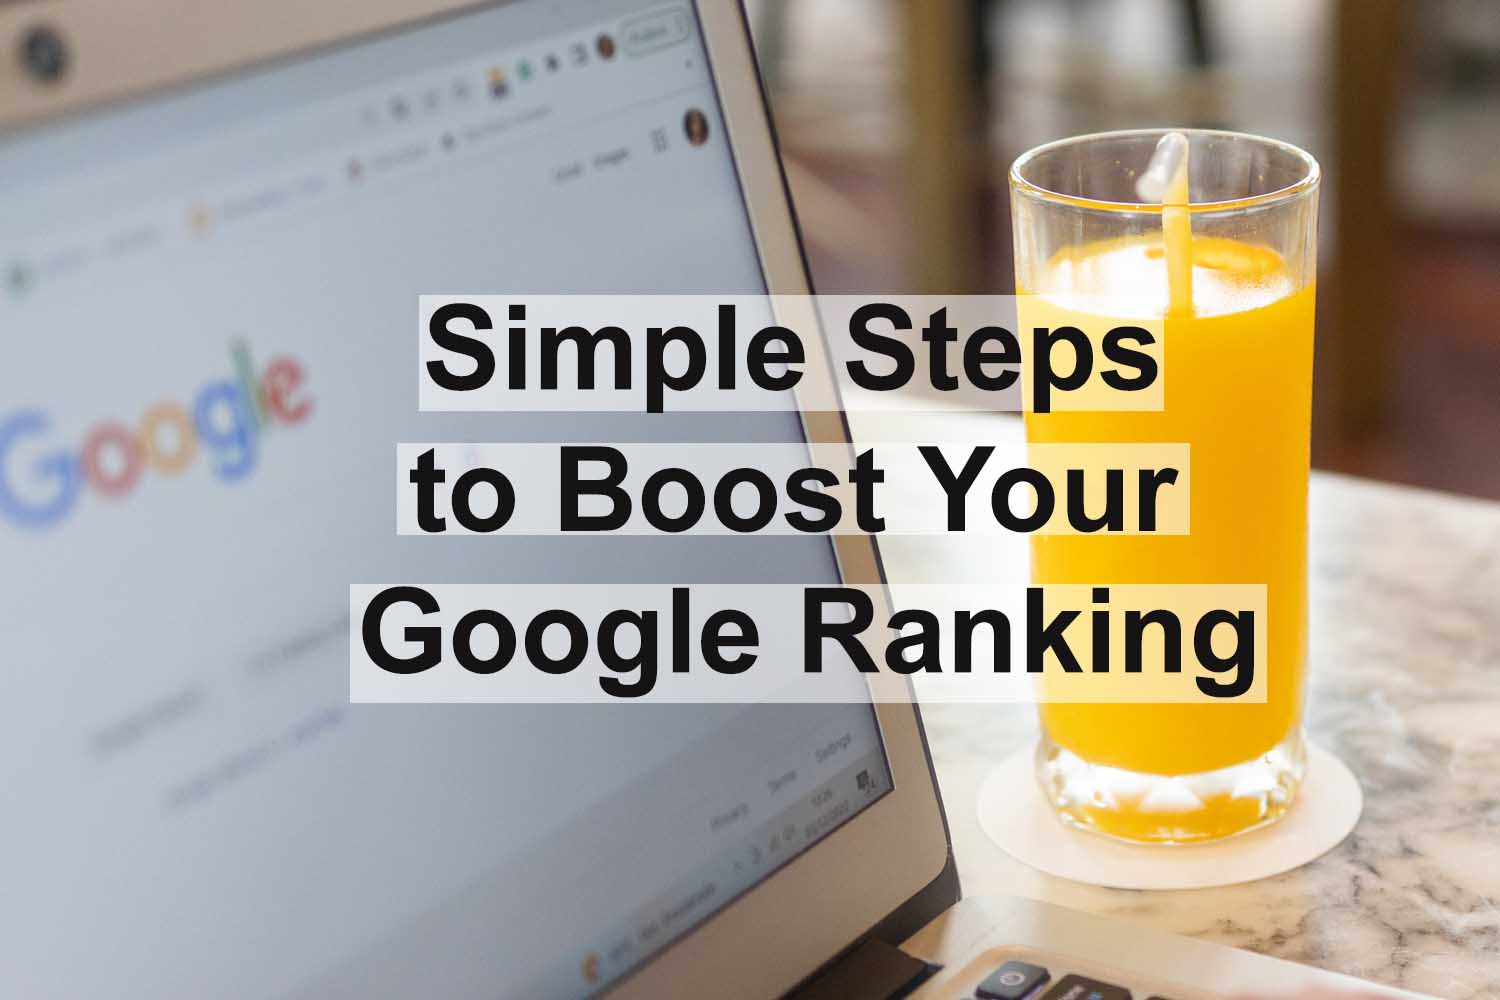 Simple Steps to Boost Your Google Ranking